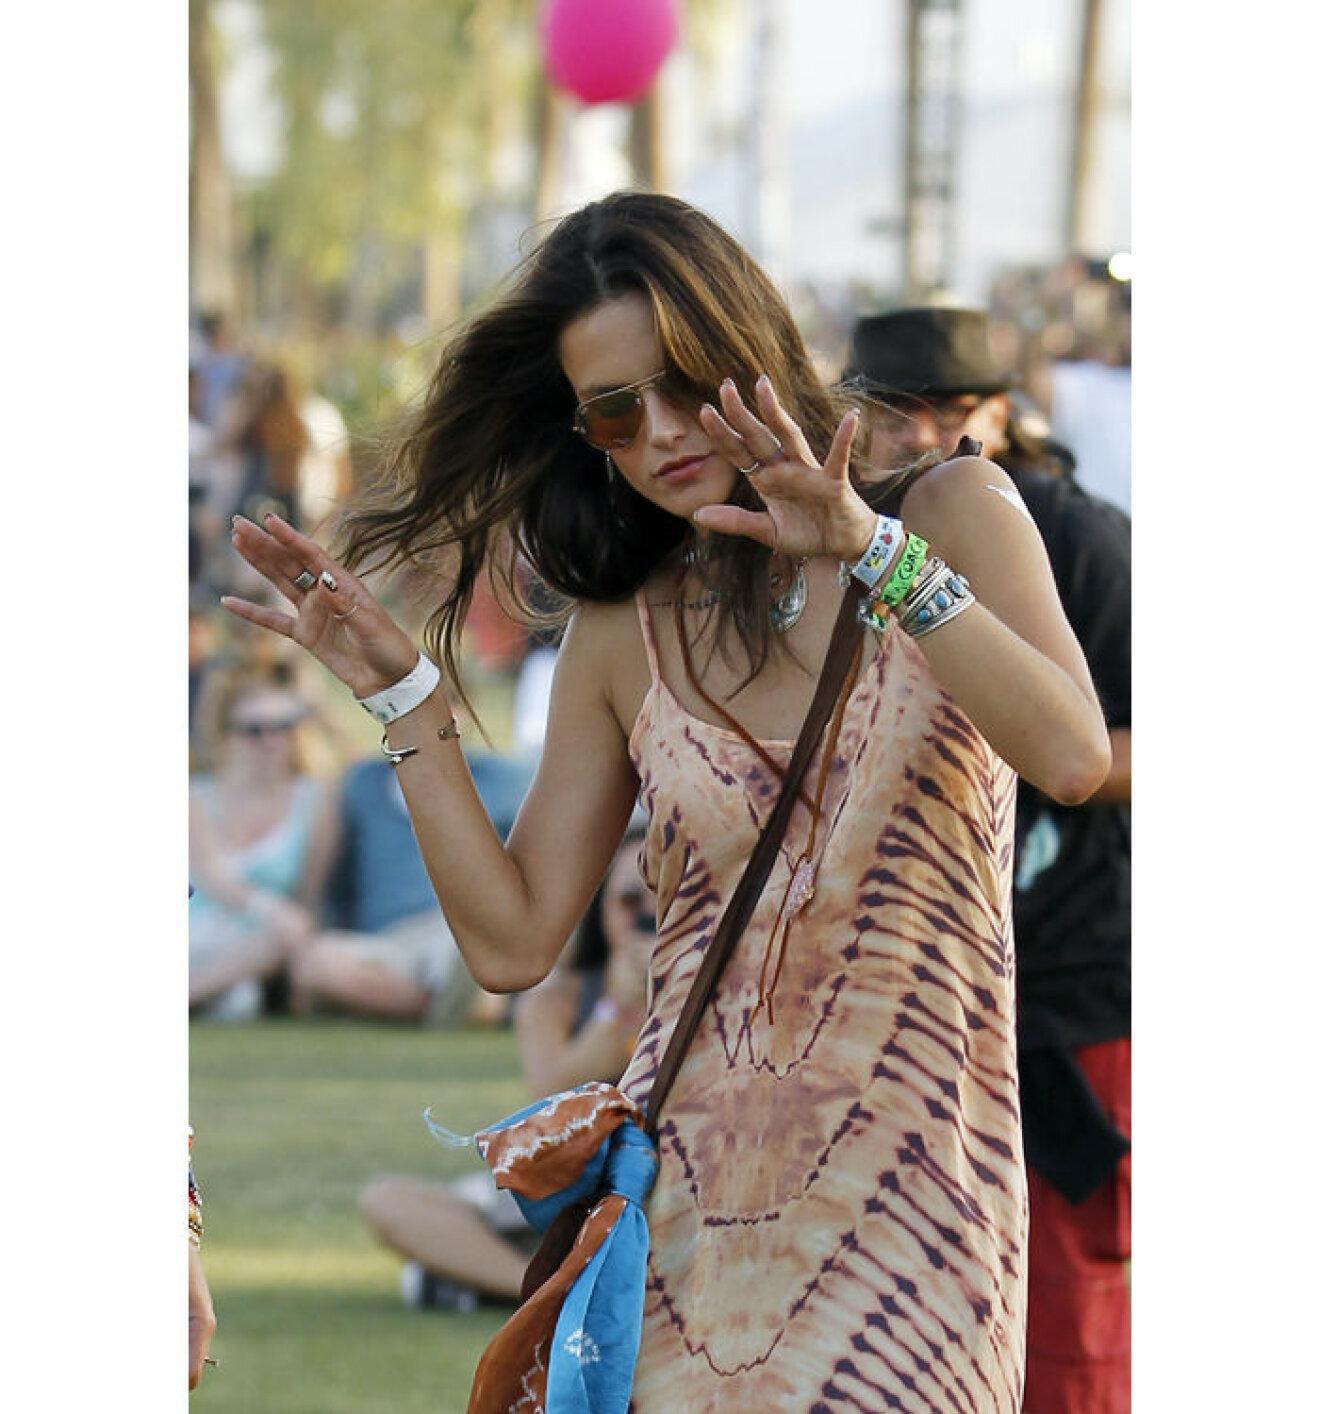 Victorias Secret model Alessandra Ambrosio parties it up at Coachella music festival and even has some temporary gold and silver tattoos for the occasion in Indio